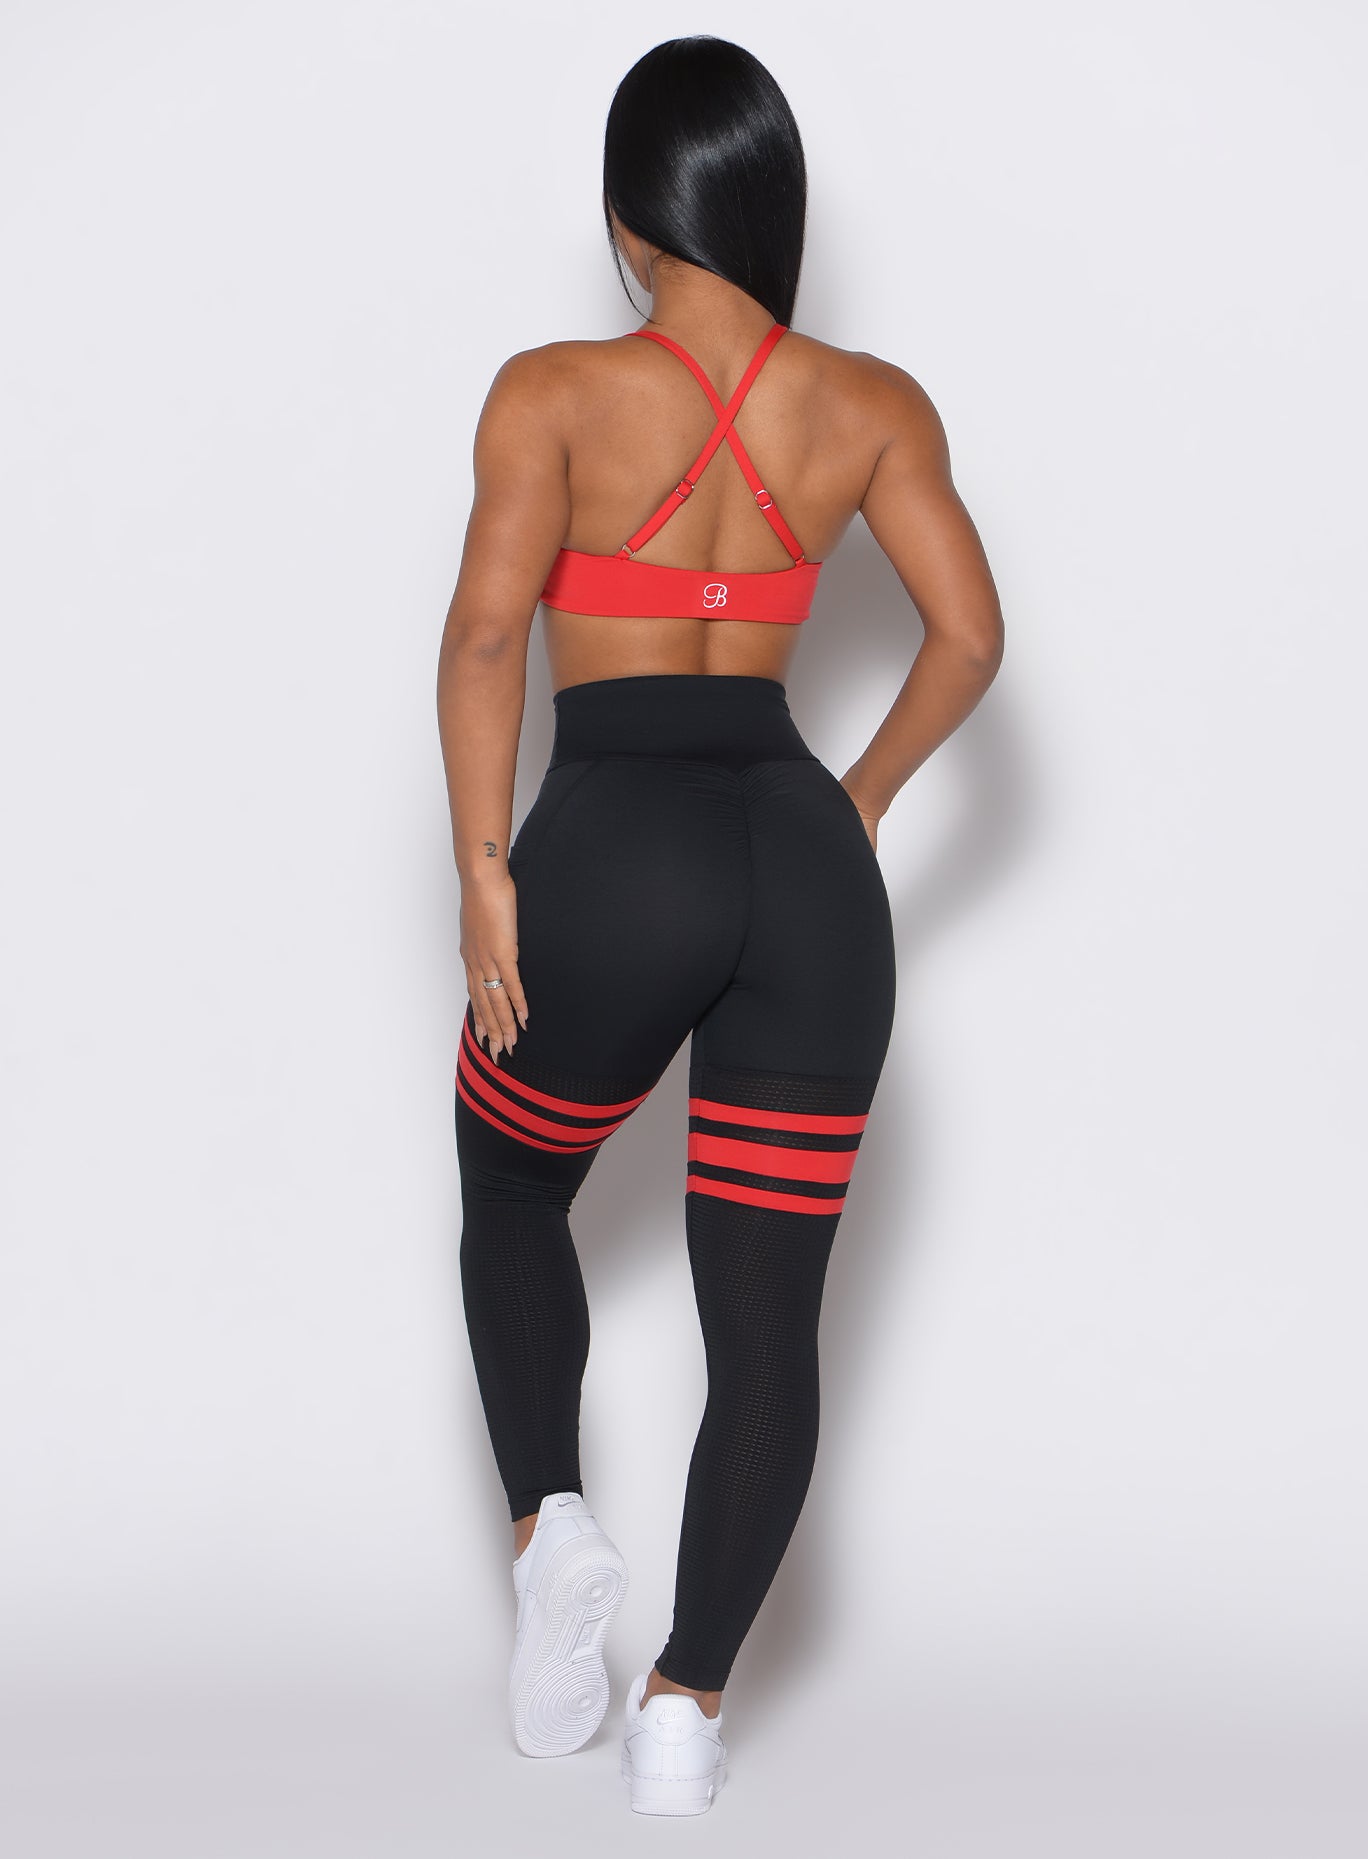 Back profile view of a model wearing the Scrunch Thigh Highs in Black Fire color along with a red sports bra